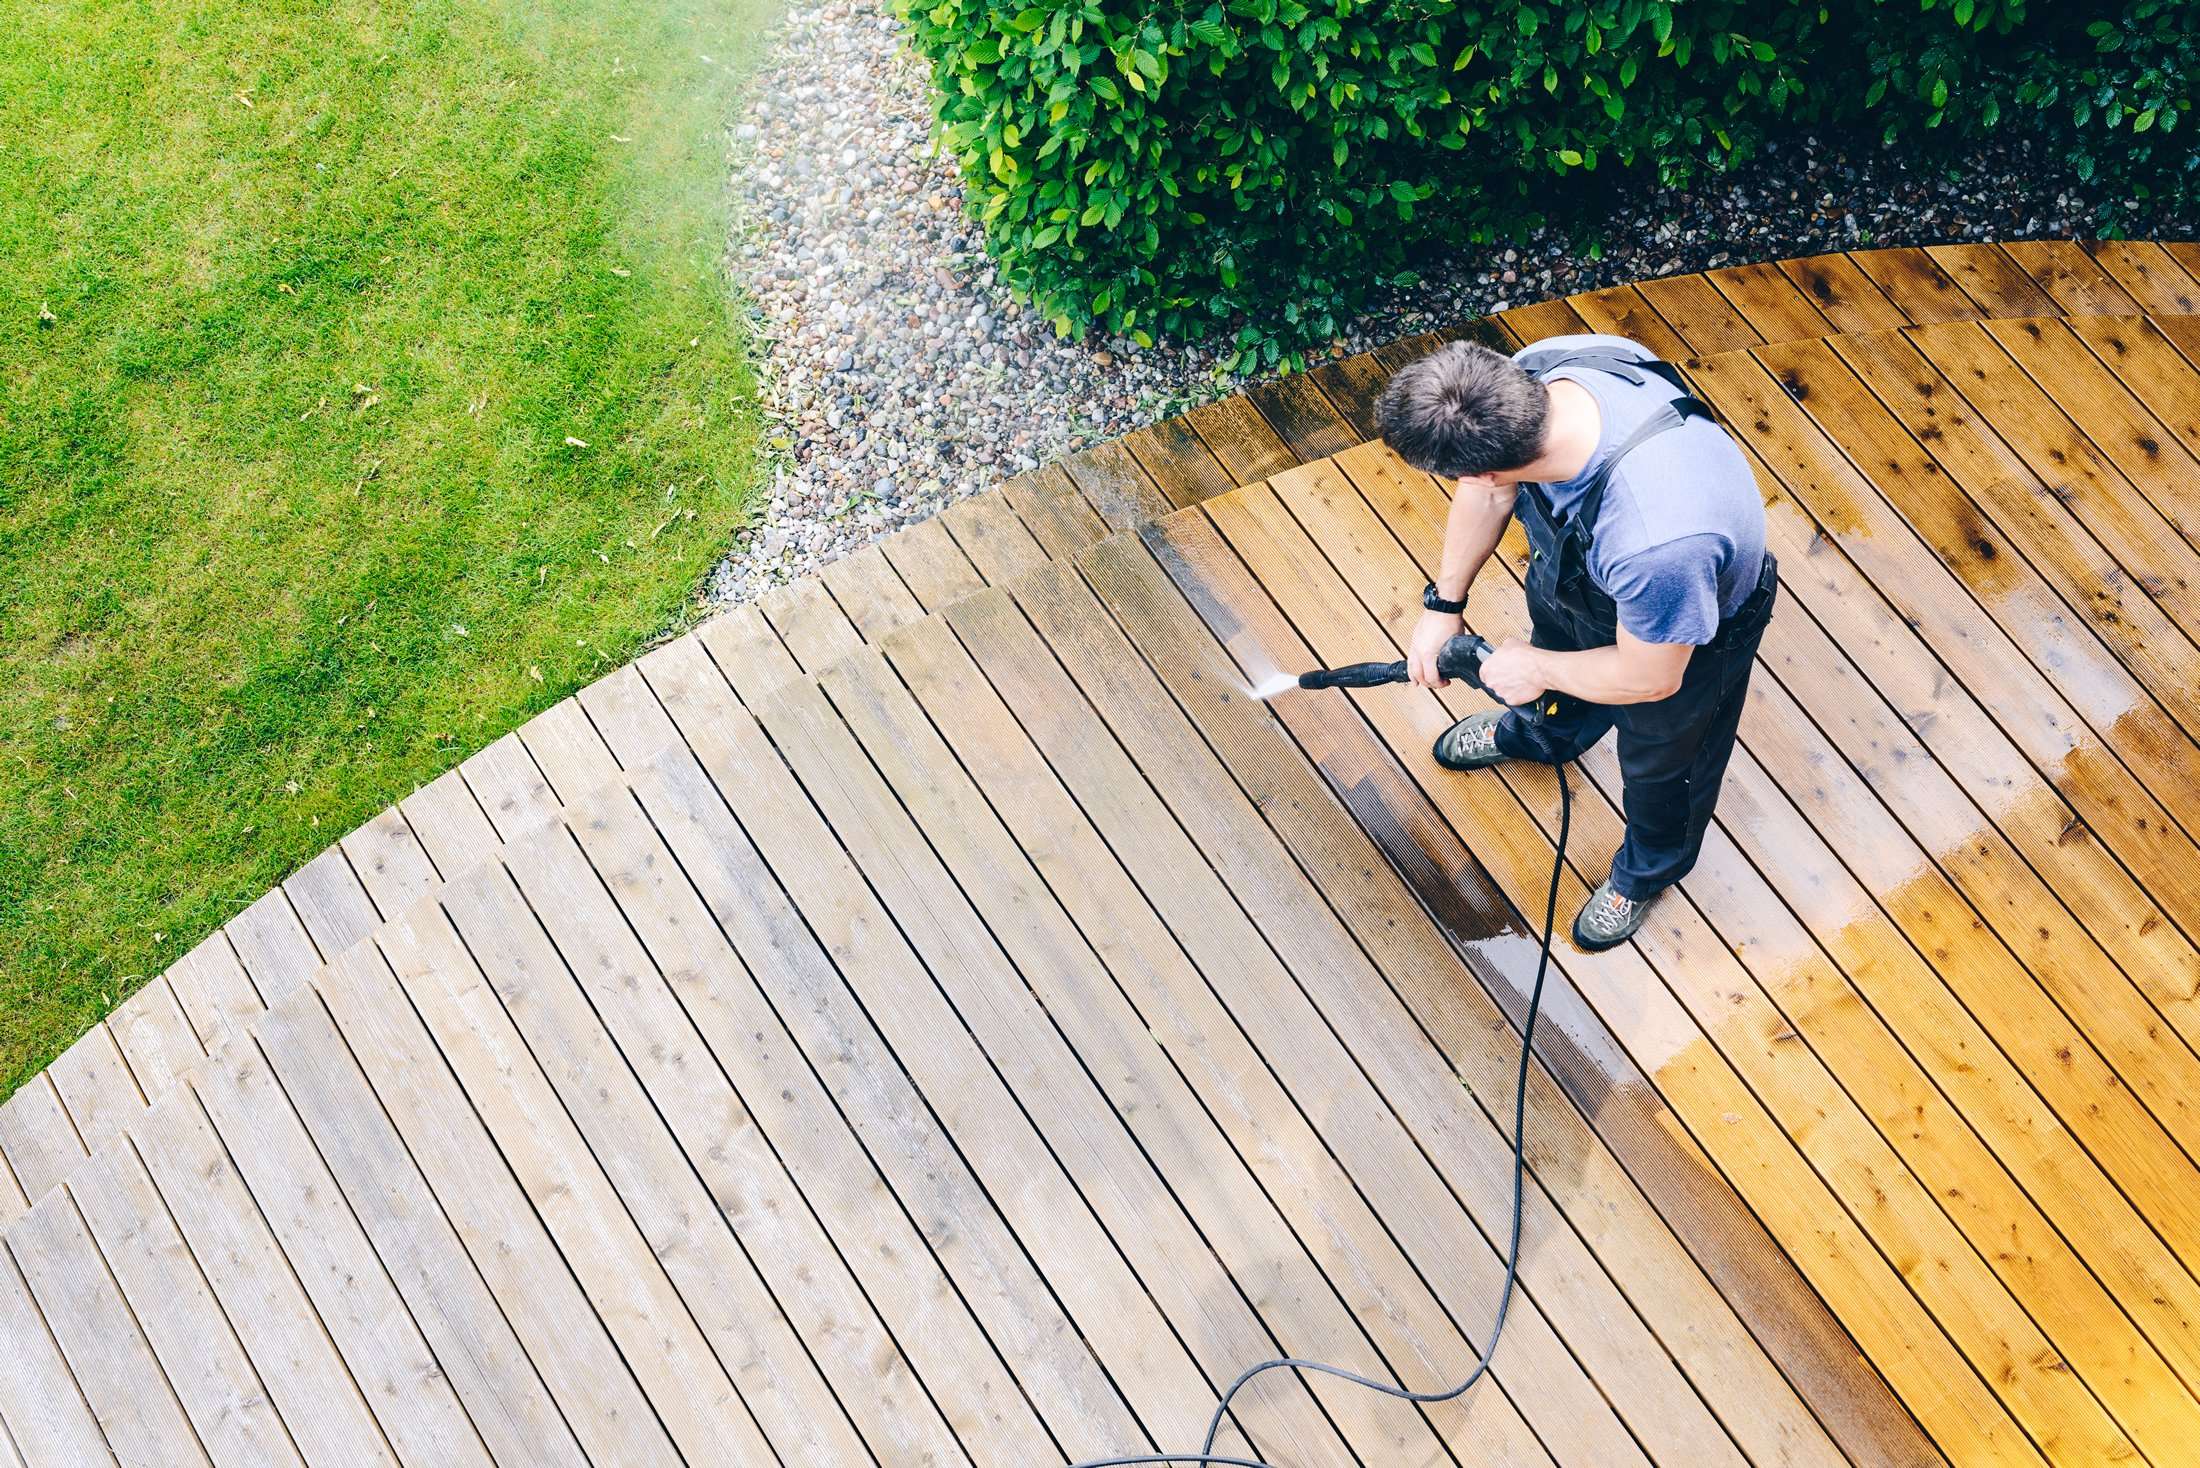 How to Clean Wood Decks With a Pressure Washer